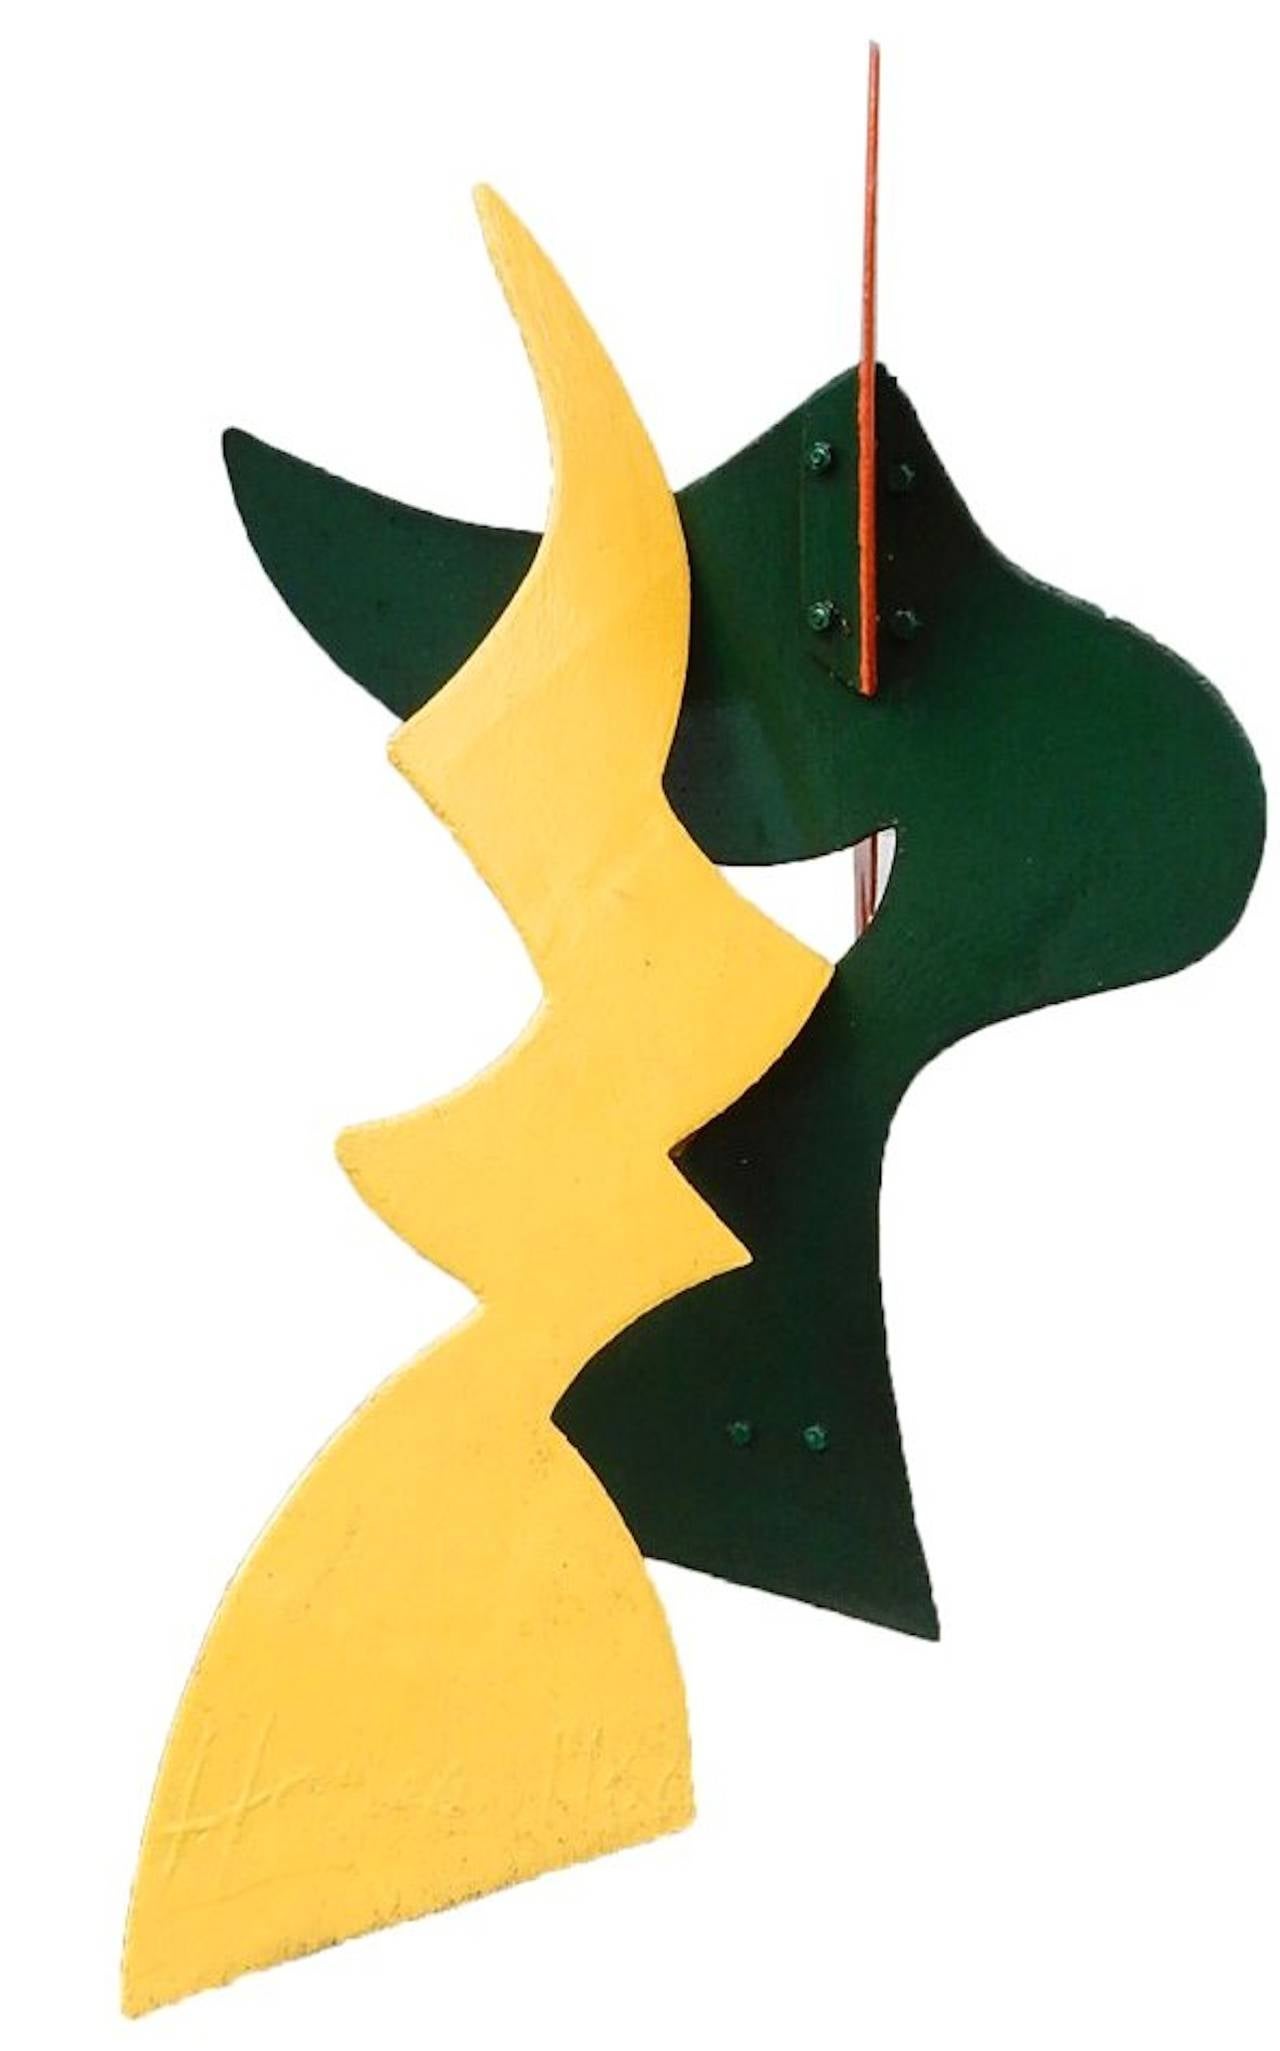 Signed and dated 1982.

Over the course of six decades, American modern master David Hayes produced a body of sculptural work that concerned itself with geometrically abstracting organic forms. His monumental outdoor sculptures contemplate the